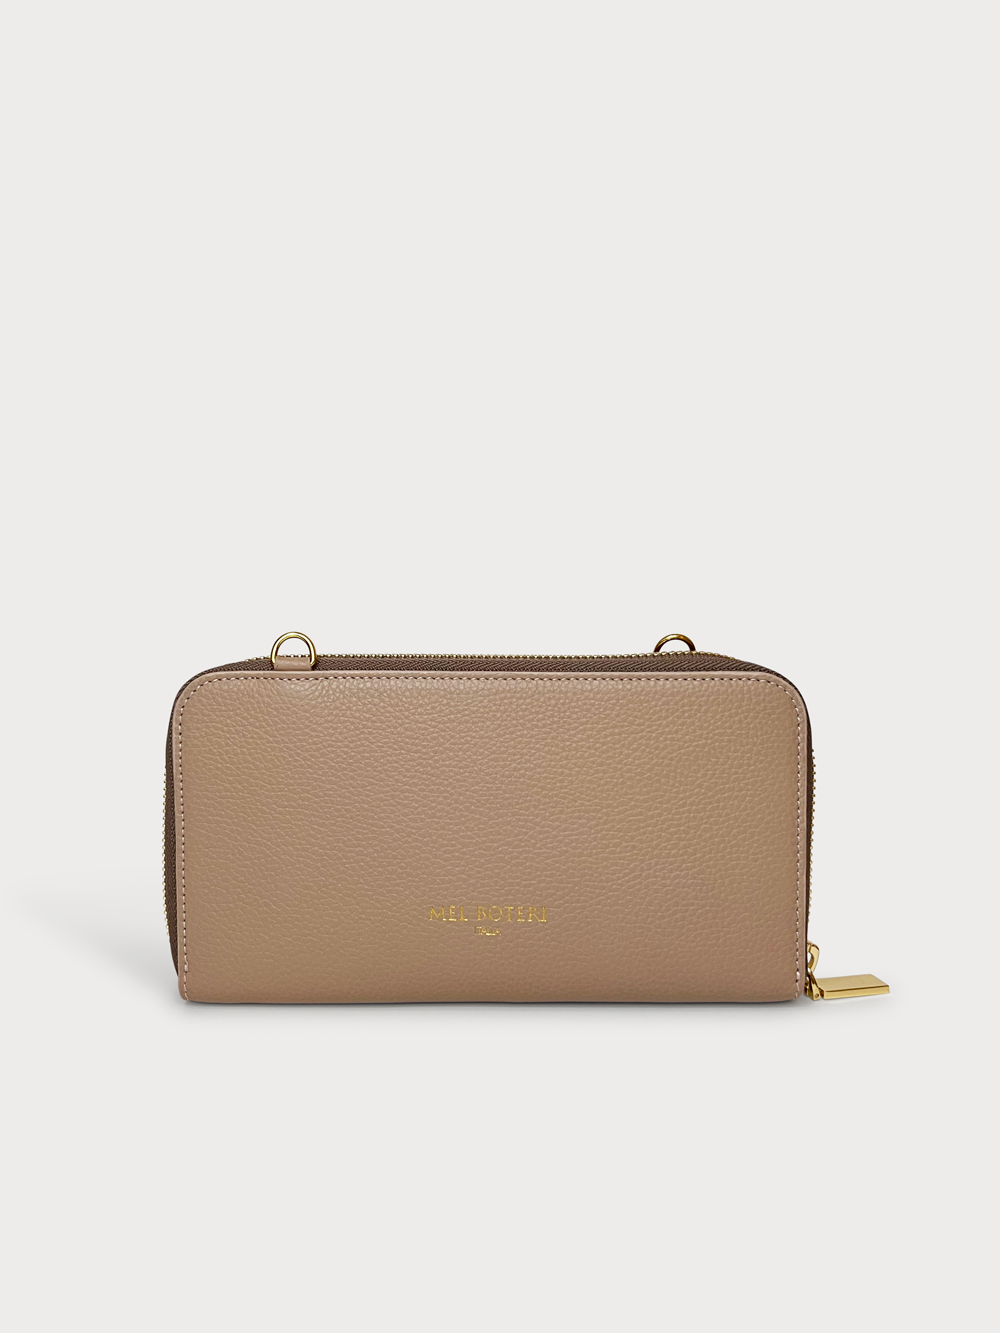 Mel Boteri | 'Himani' Wallet Clutch Bag With Detachable Cross-Body Strap | cipria leather | back view